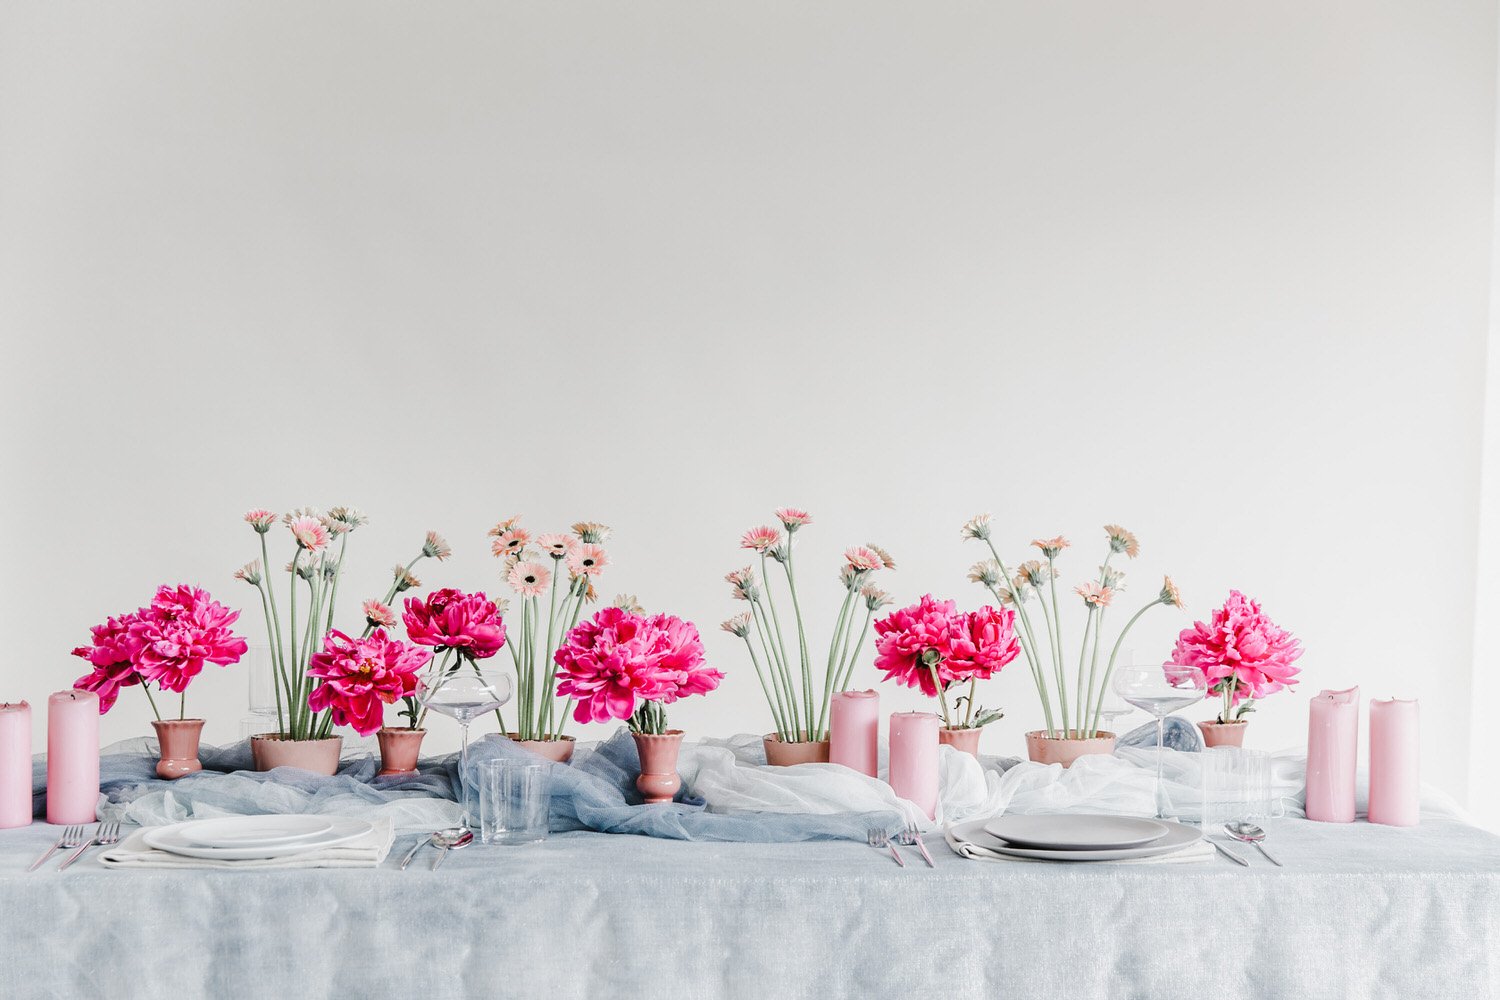  Sapphire Mist as table runners ・  Jessica Jaccarino Photography  ・  Blooms Design House  